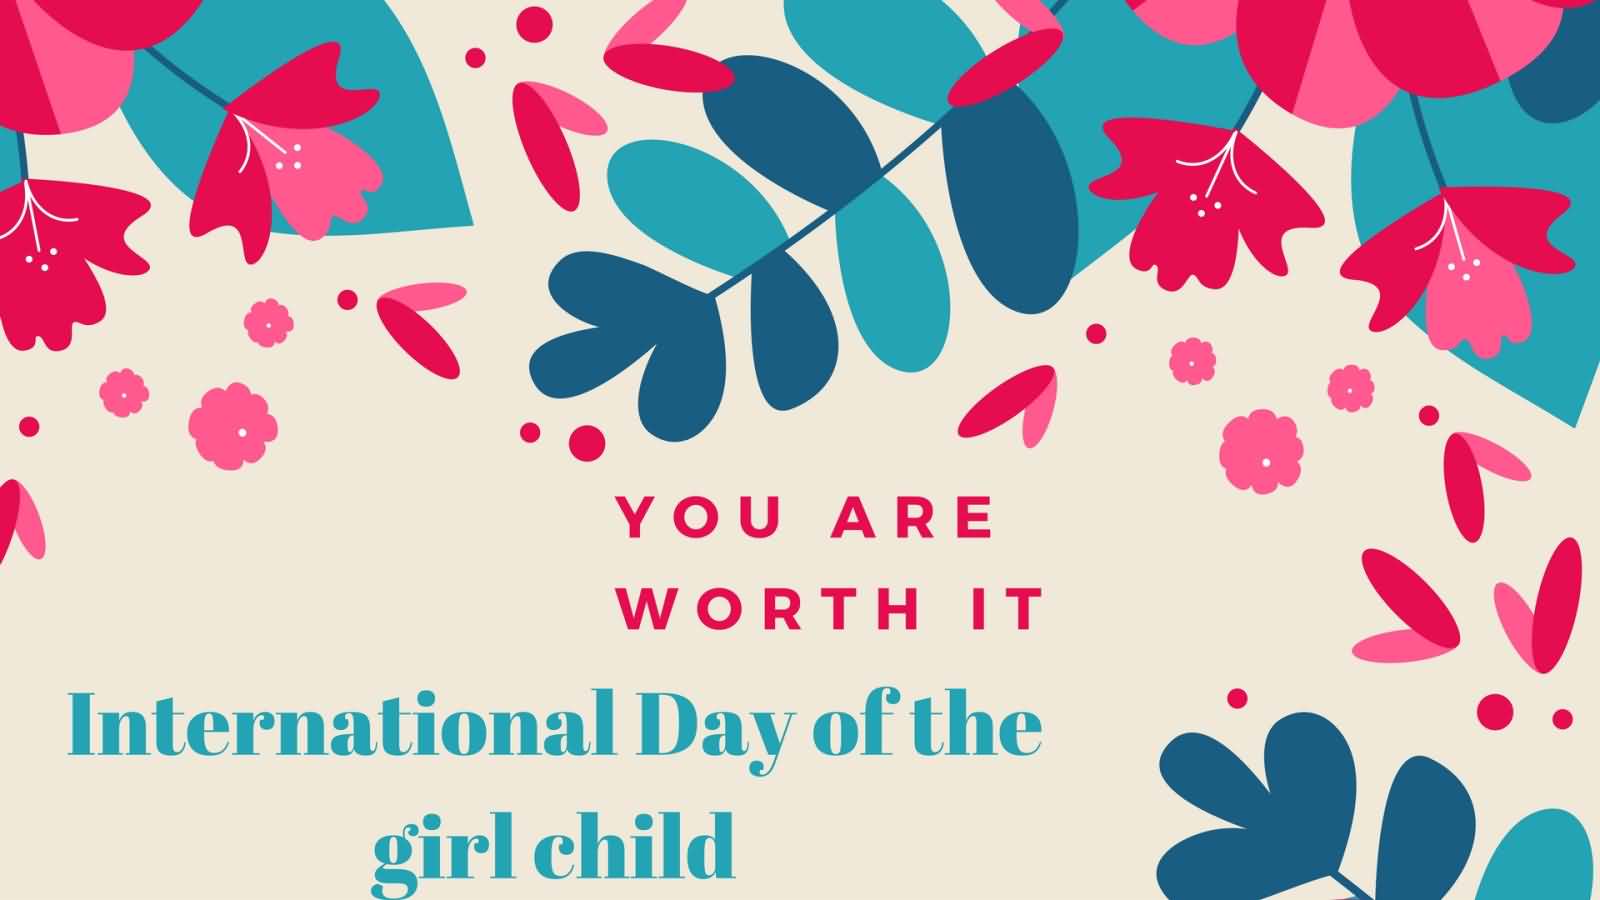 You Are Worth It International Day of the Girl Child Greeting Card